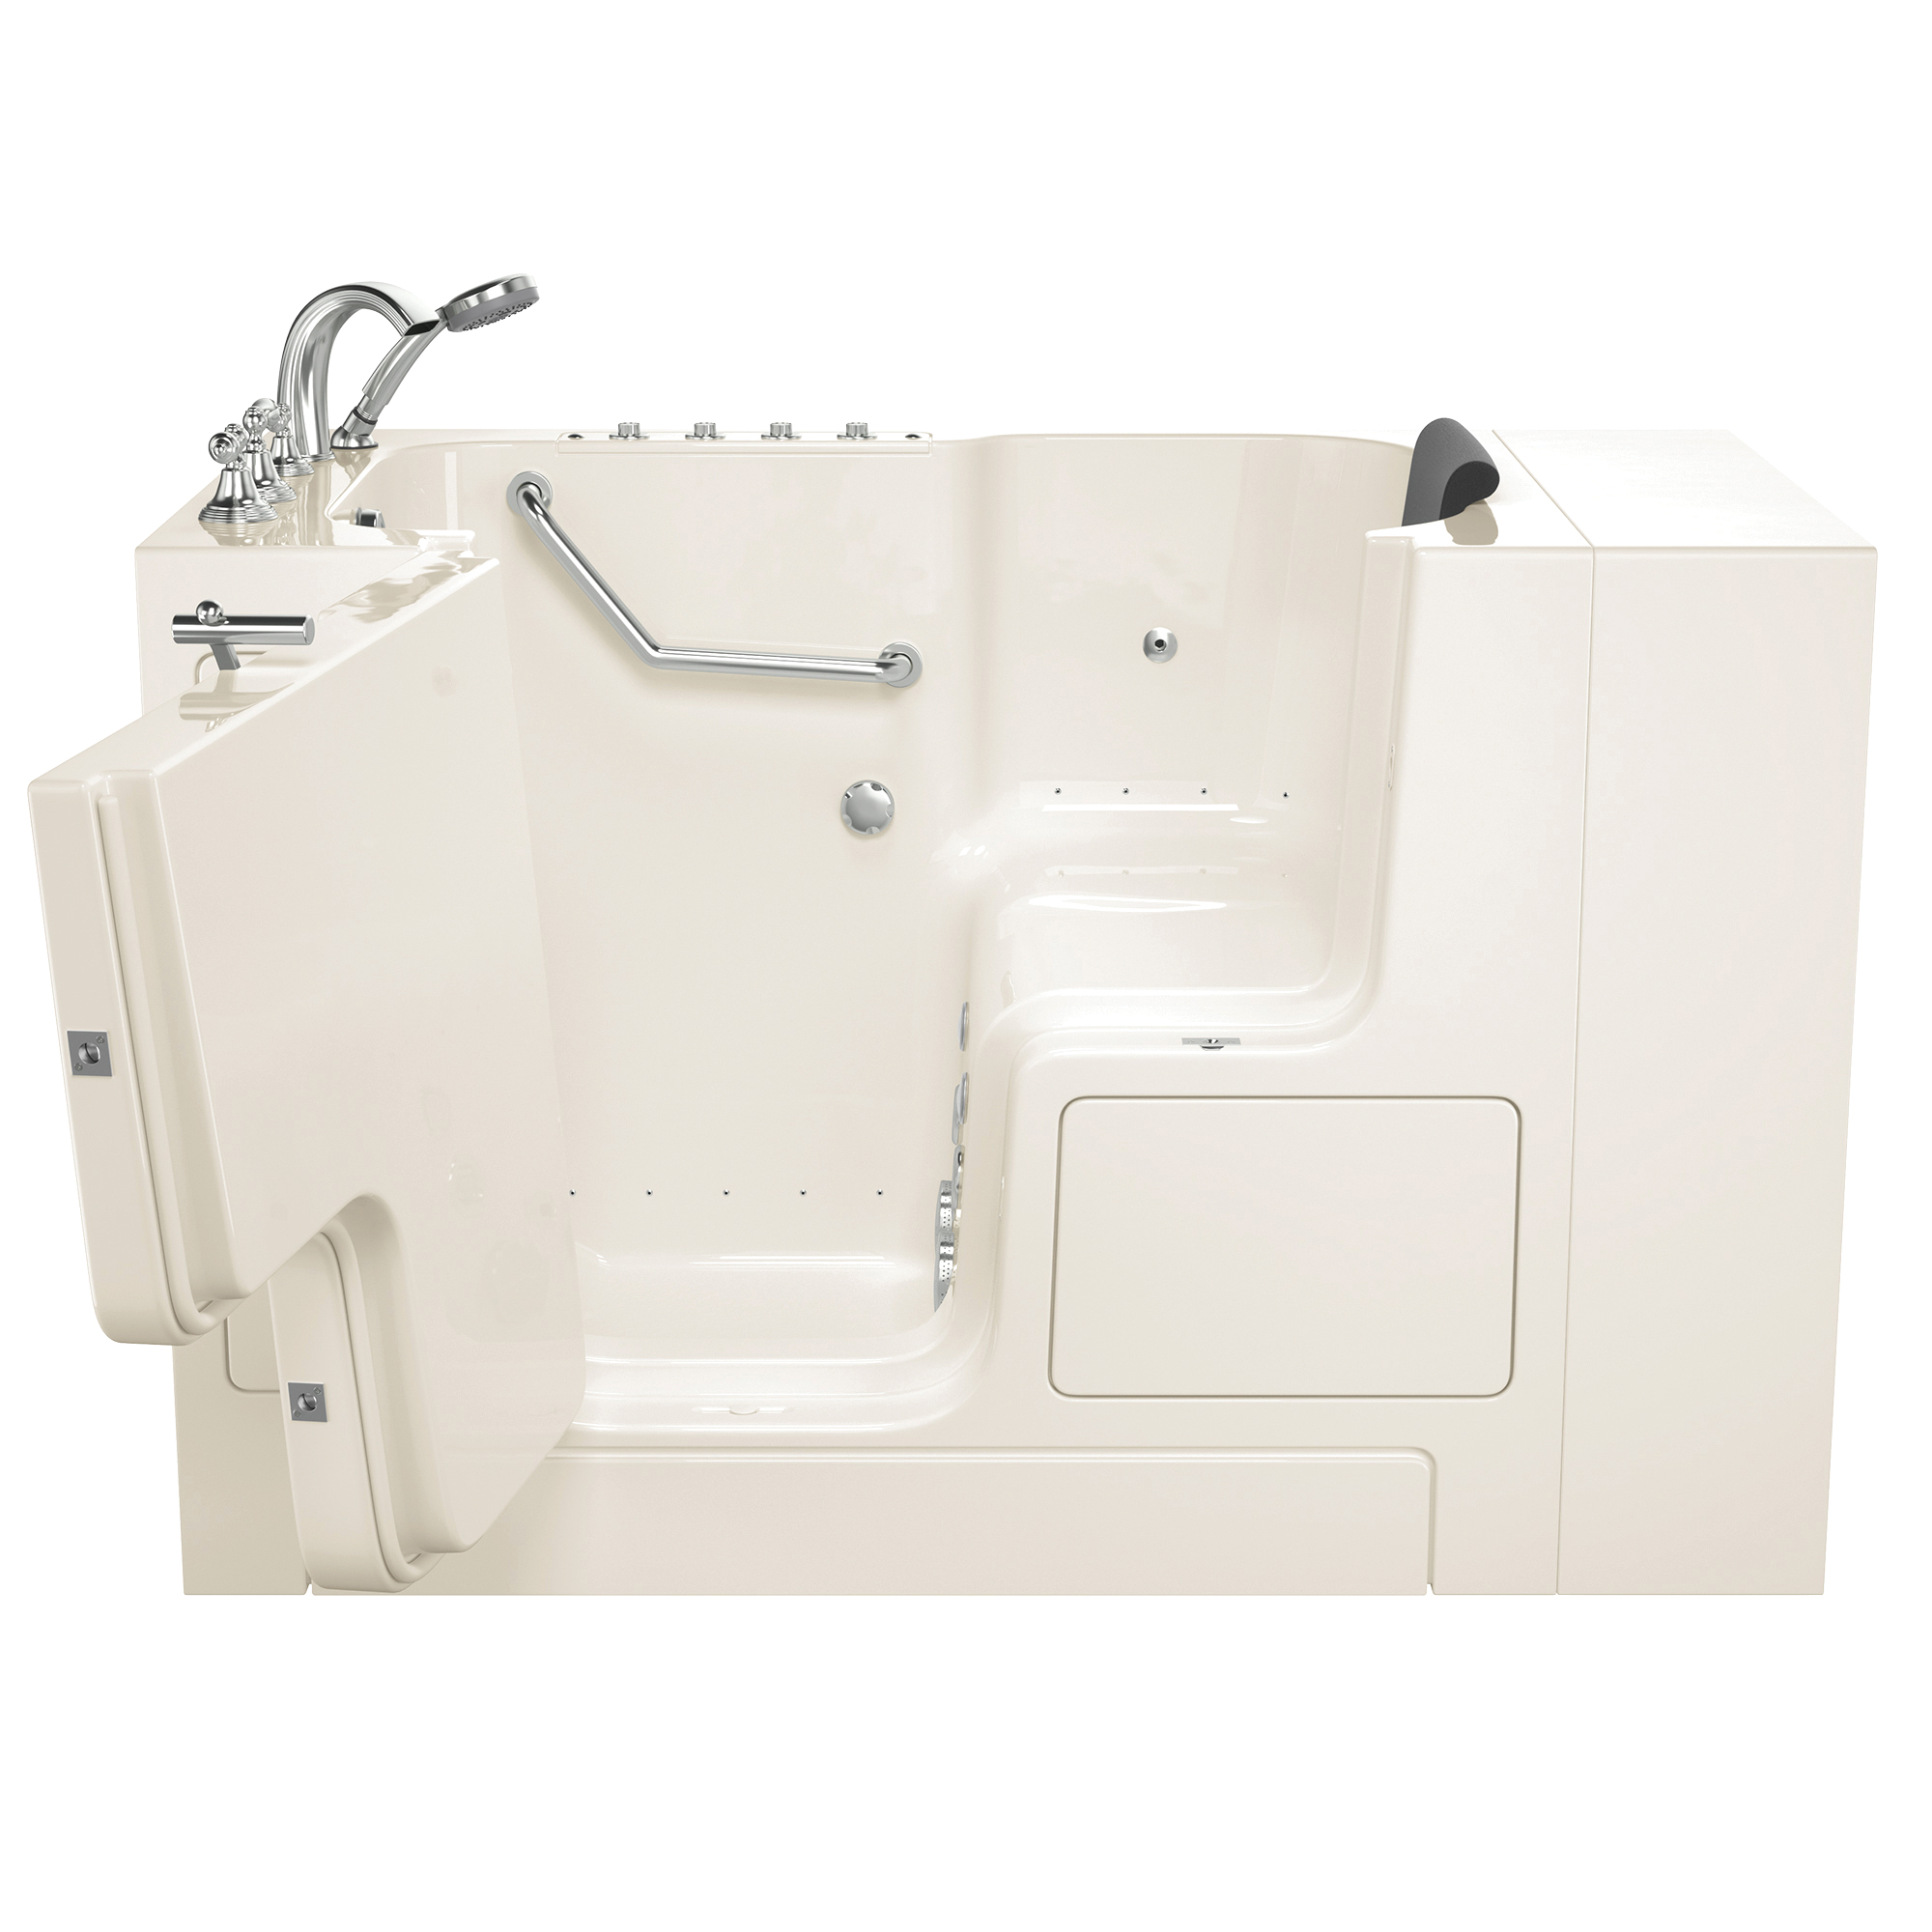 Gelcoat Premium Series 32 x 52 -Inch Walk-in Tub With Combination Air Spa and Whirlpool Systems - Left-Hand Drain With Faucet